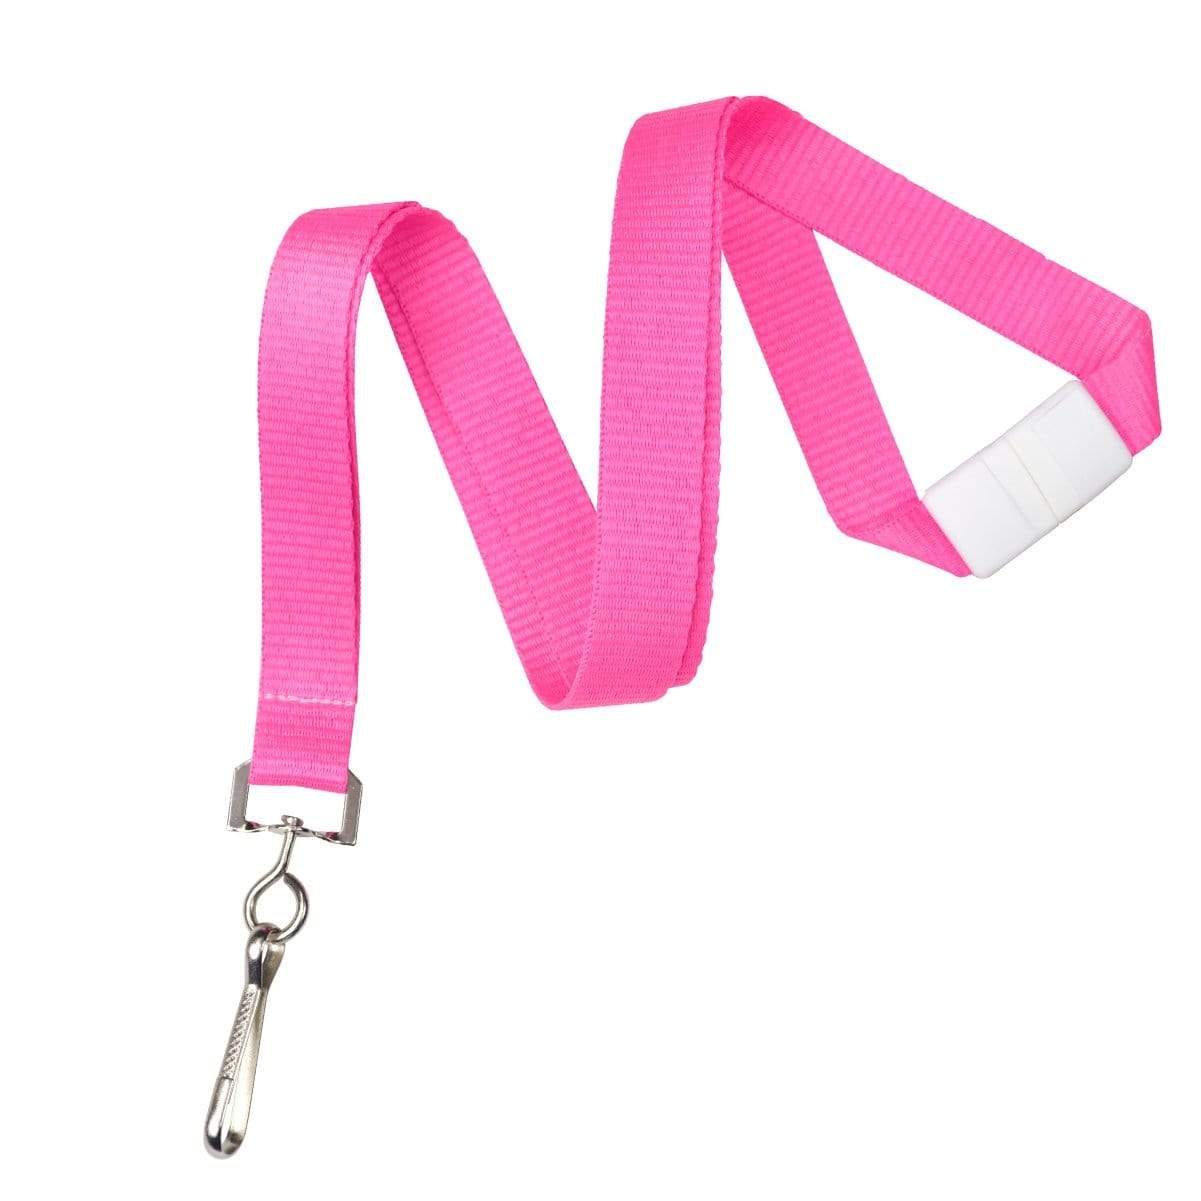 Neon Pink Neon Lanyard with Safety Breakaway Clasp - Bright Soft Lanyards 2138-504X 2138-5050